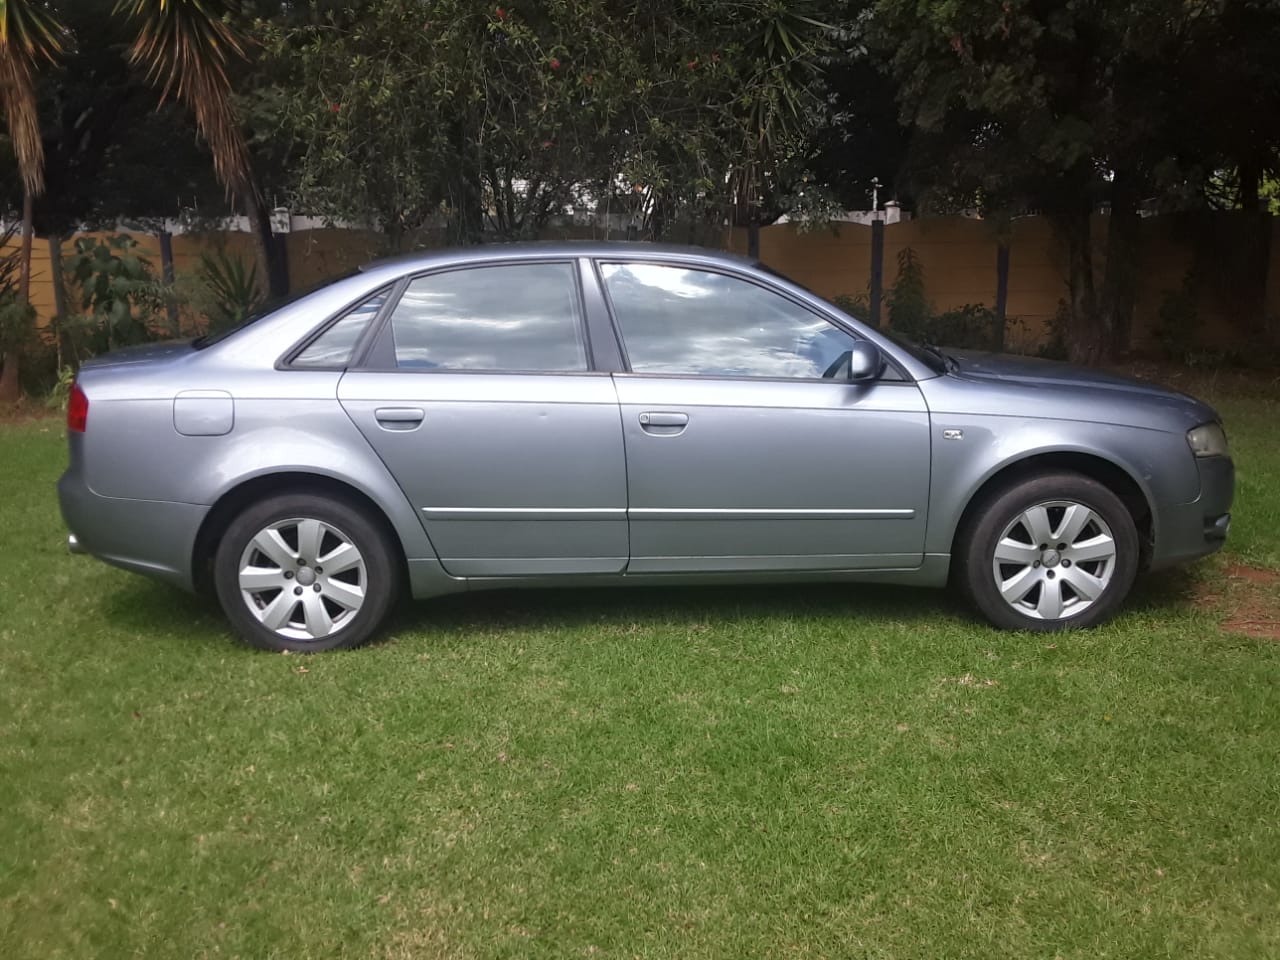 Audi 1.8T B7  2005  silver grey FWD  Good condition. Big intercooler and mapping